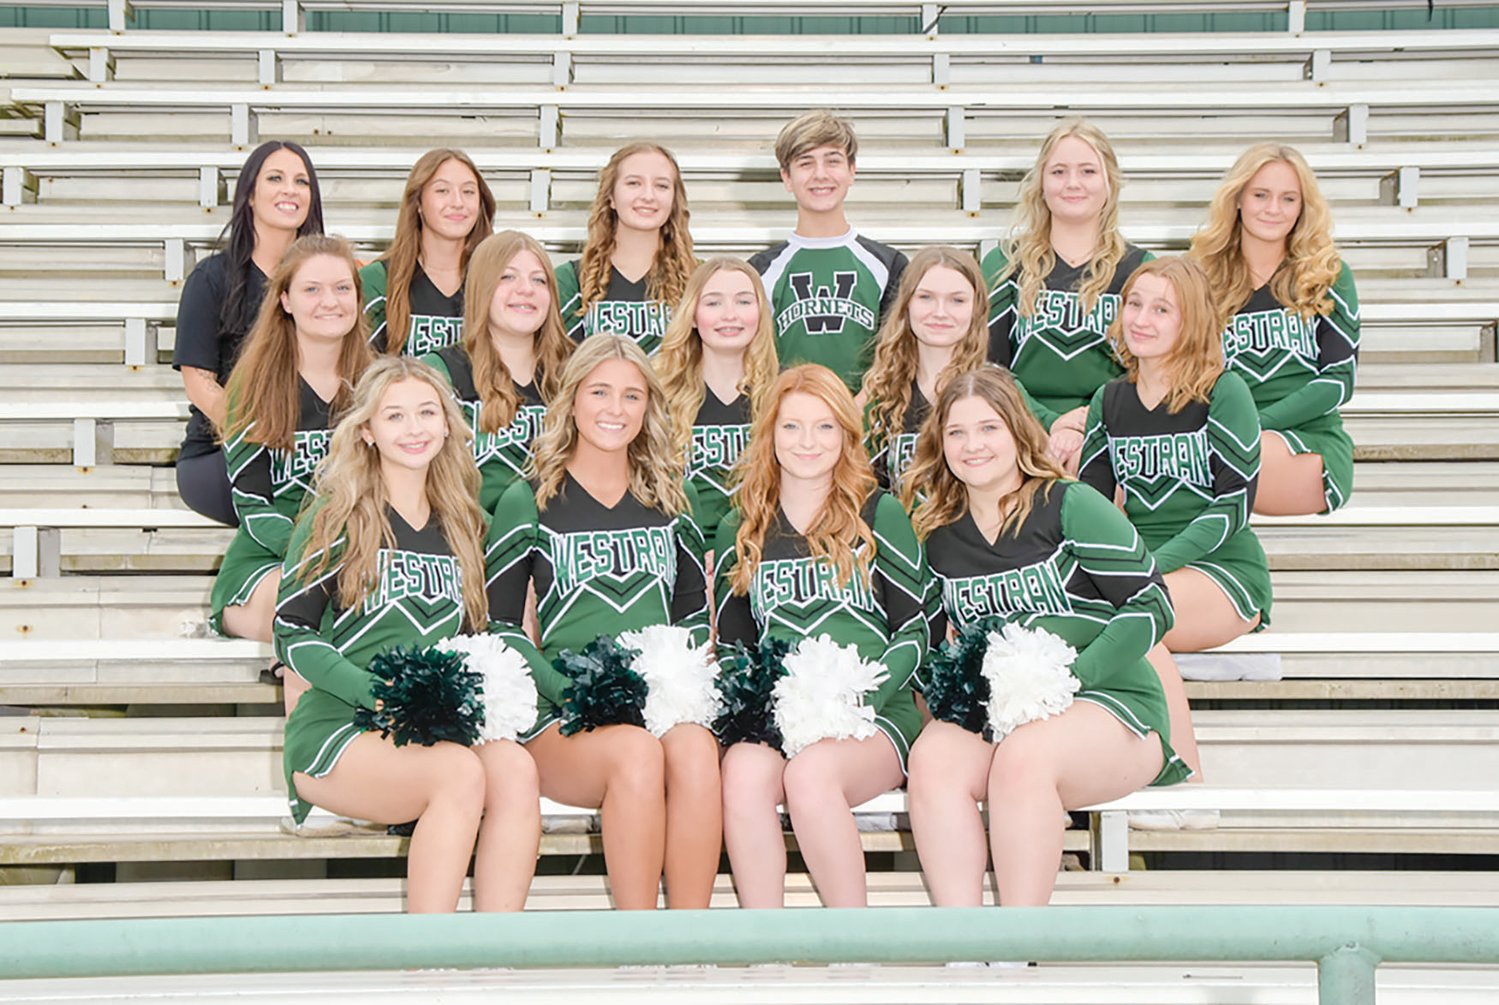 The Westran High School cheerleaders gathered for a group photo before the start of football season at the stadium in Huntsville on Friday, Aug. 19. The group cheers at Hornets’ football and basketball games. Here’s the group. Front row, from left to right, Tessie Smith, Kenzie Black, Addison Mathes and Lacey Wales. Middle row, Aliza Prewitt, Elexis Mills, Emily Sexton, Kiersten Saphian and Alyssa Wisdom. Back row, coach and sponsor Shayla Beckfield, Hadley Harvey, Khloe Boyack, Trenton Ames, Mali Powell and Jill Stephenson.